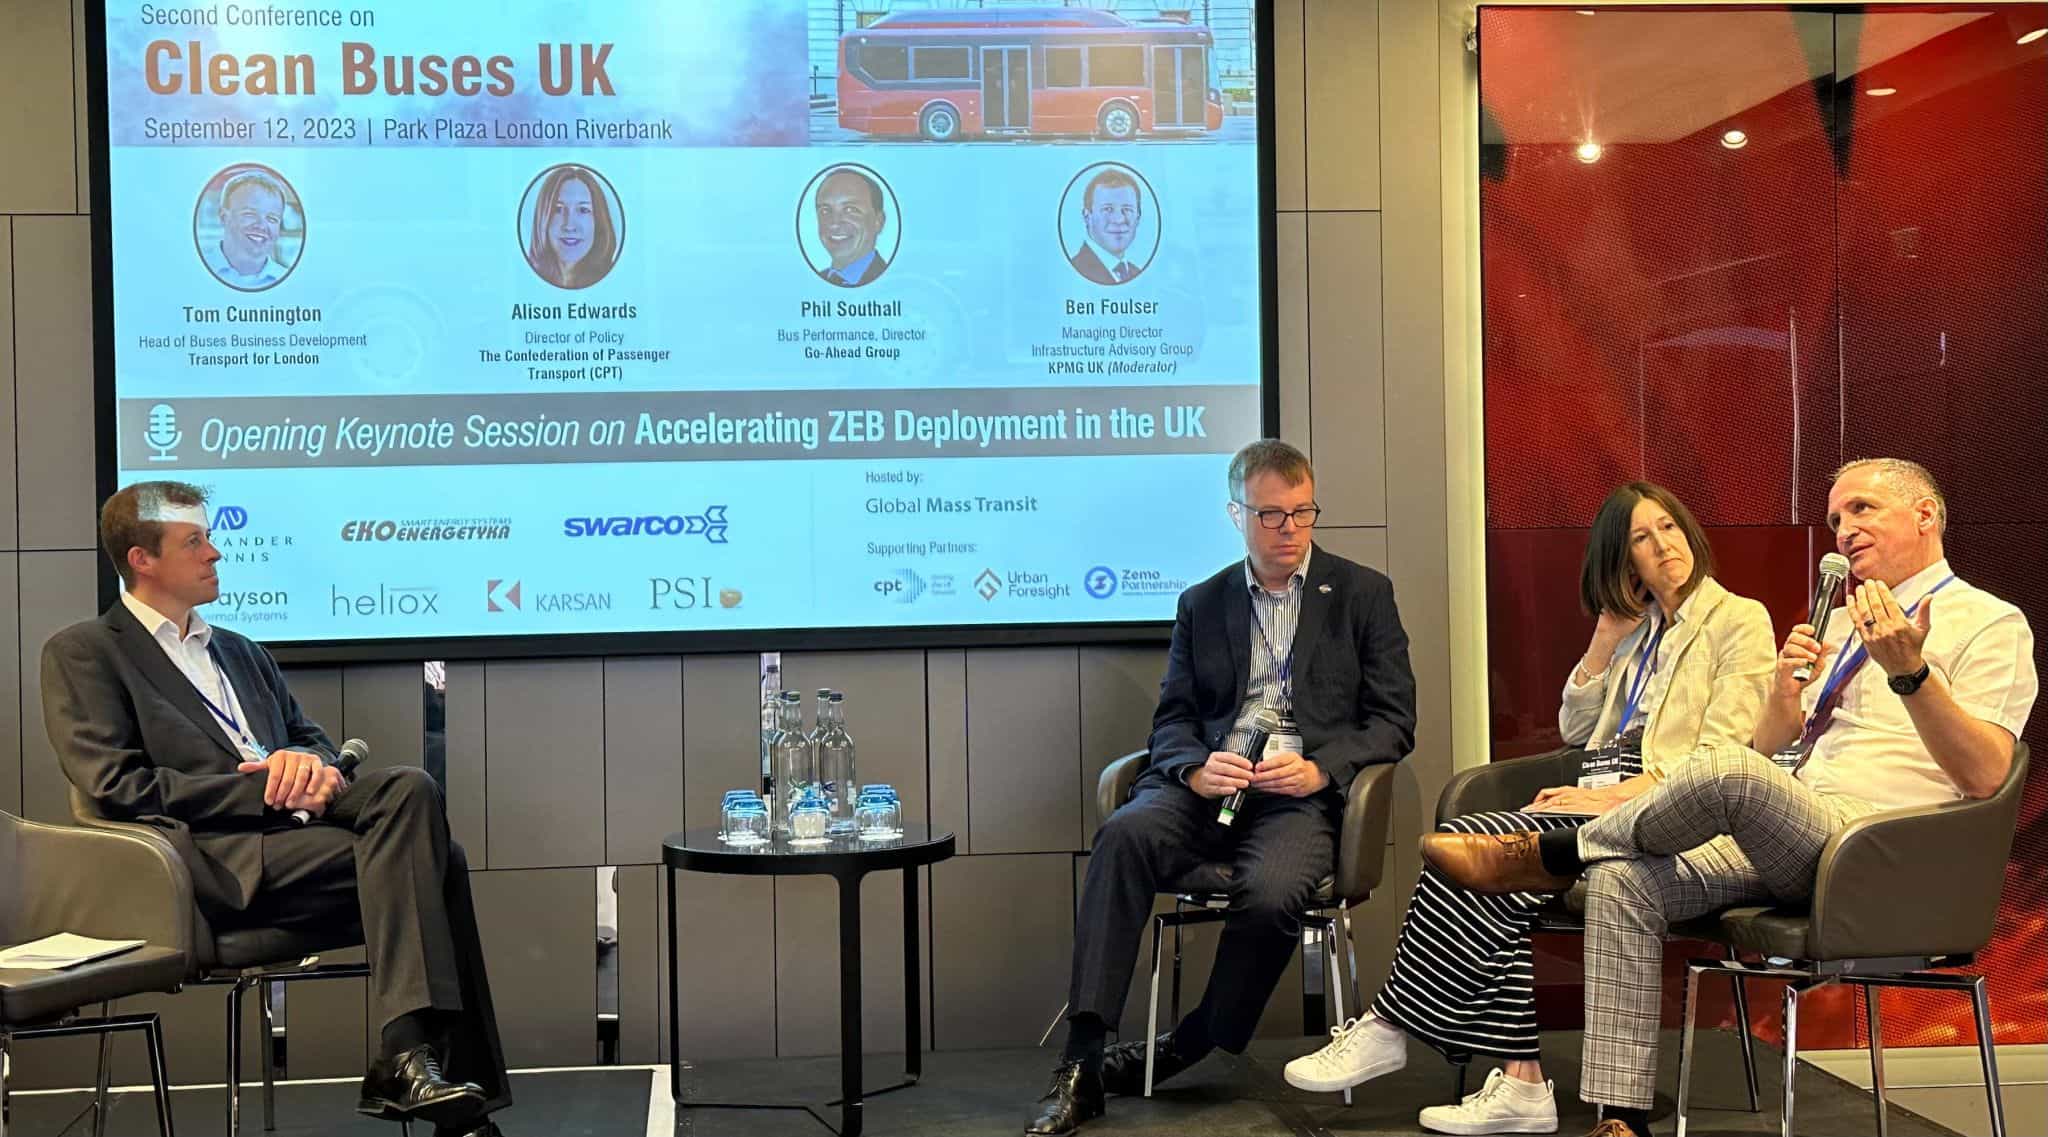 From left: KPMG's Ben Foulser, TfL's Tom Cunnington, Confederation of Passenger Transport (CPT)'s Alison Edwards and Go-Ahead Group's Phil Southall discussing zero-deployment buses